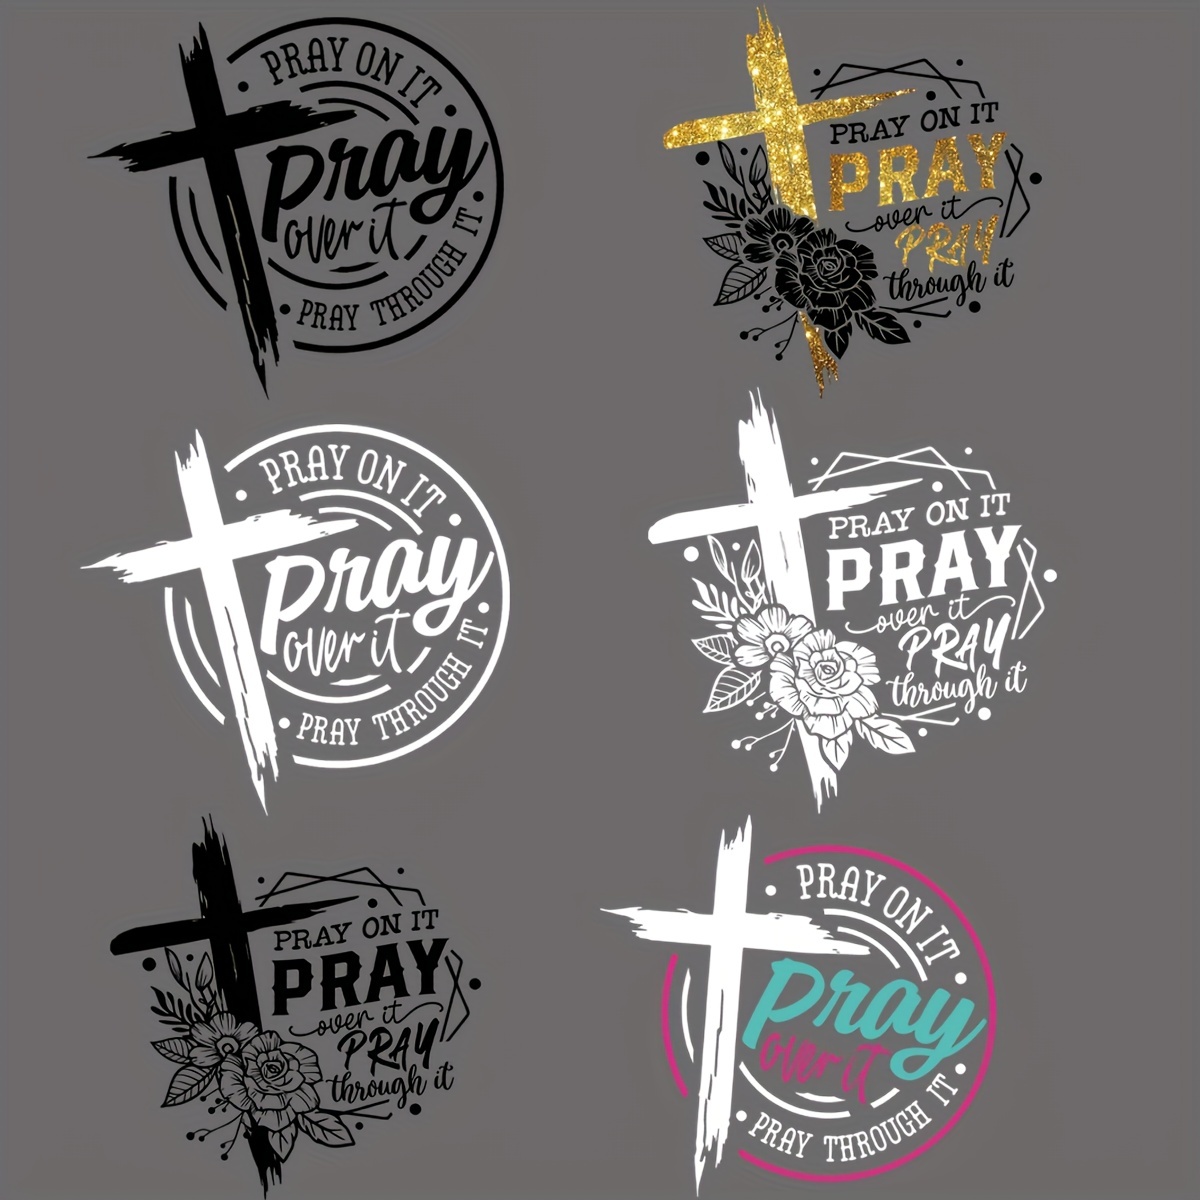 Jesus Iron-on Transfer Designs Heat Press Appliques Heat Transfer Vinyl  Patches For DIY Clothing T-Shirt Mask Jeans Backpack